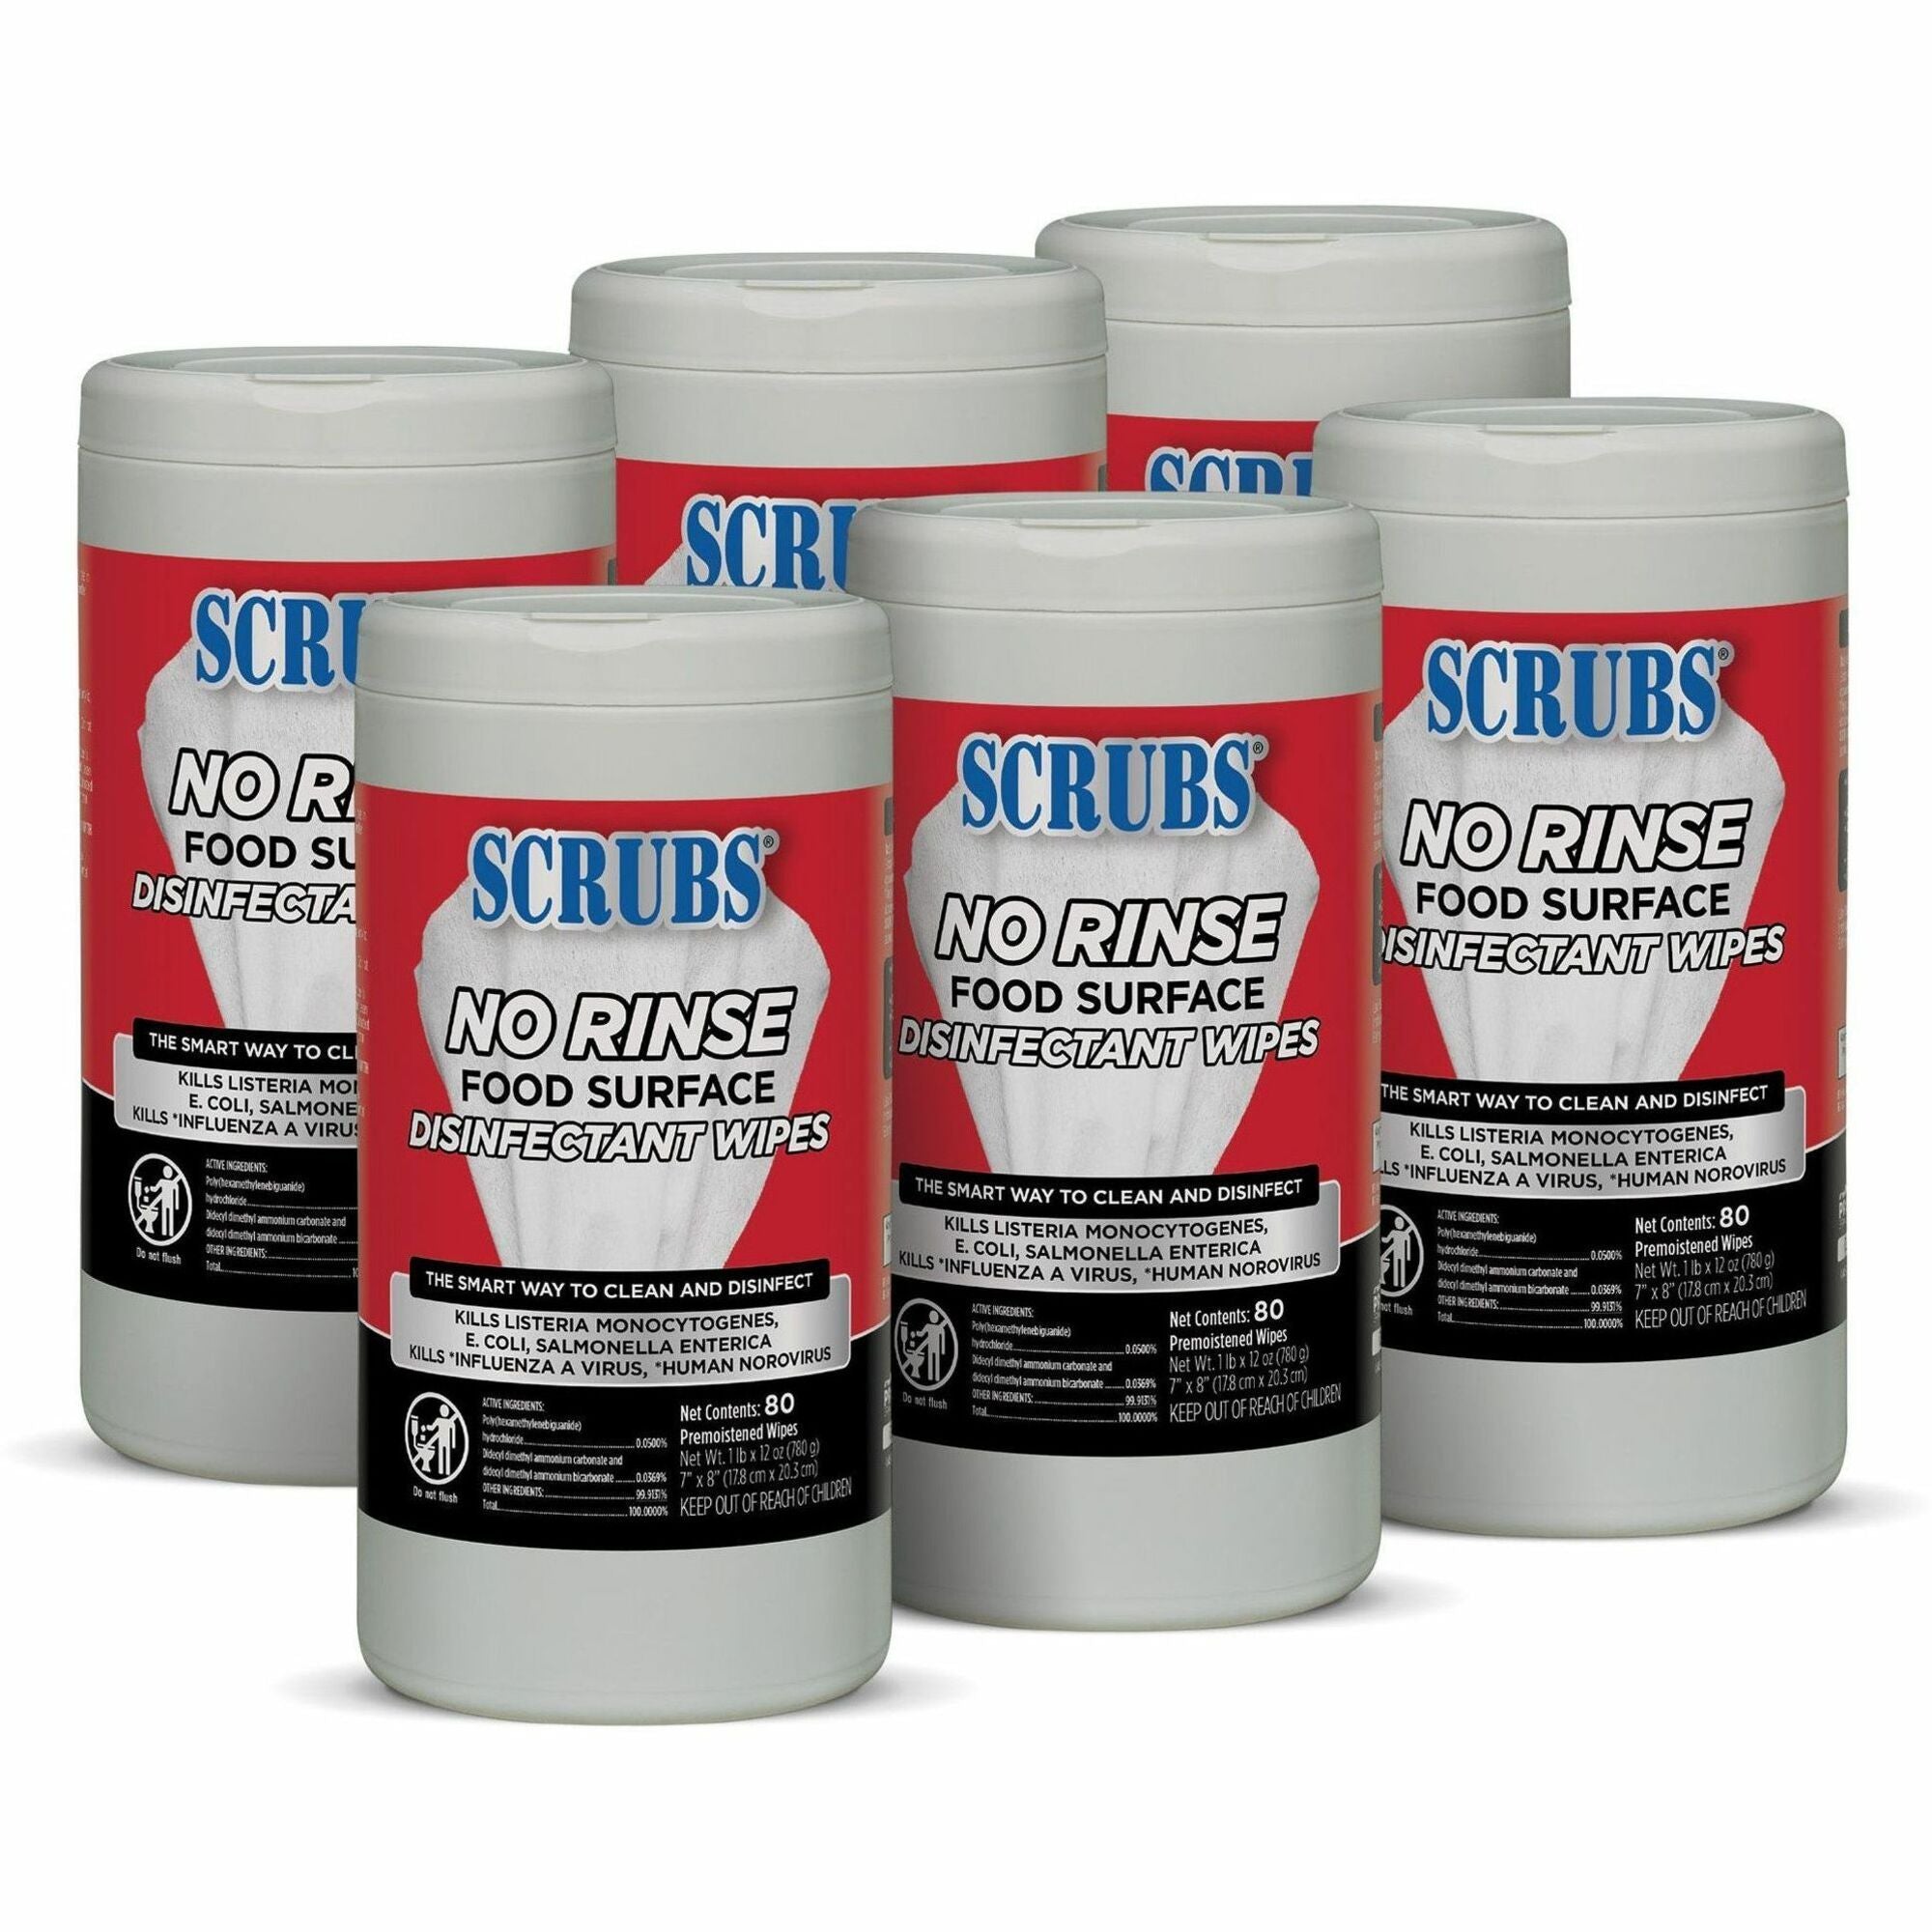 scrubs-no-rinse-food-surface-disinfectant-wipes-ready-to-use-80-can-6-carton-rinse-free-red_itw97080ct - 1